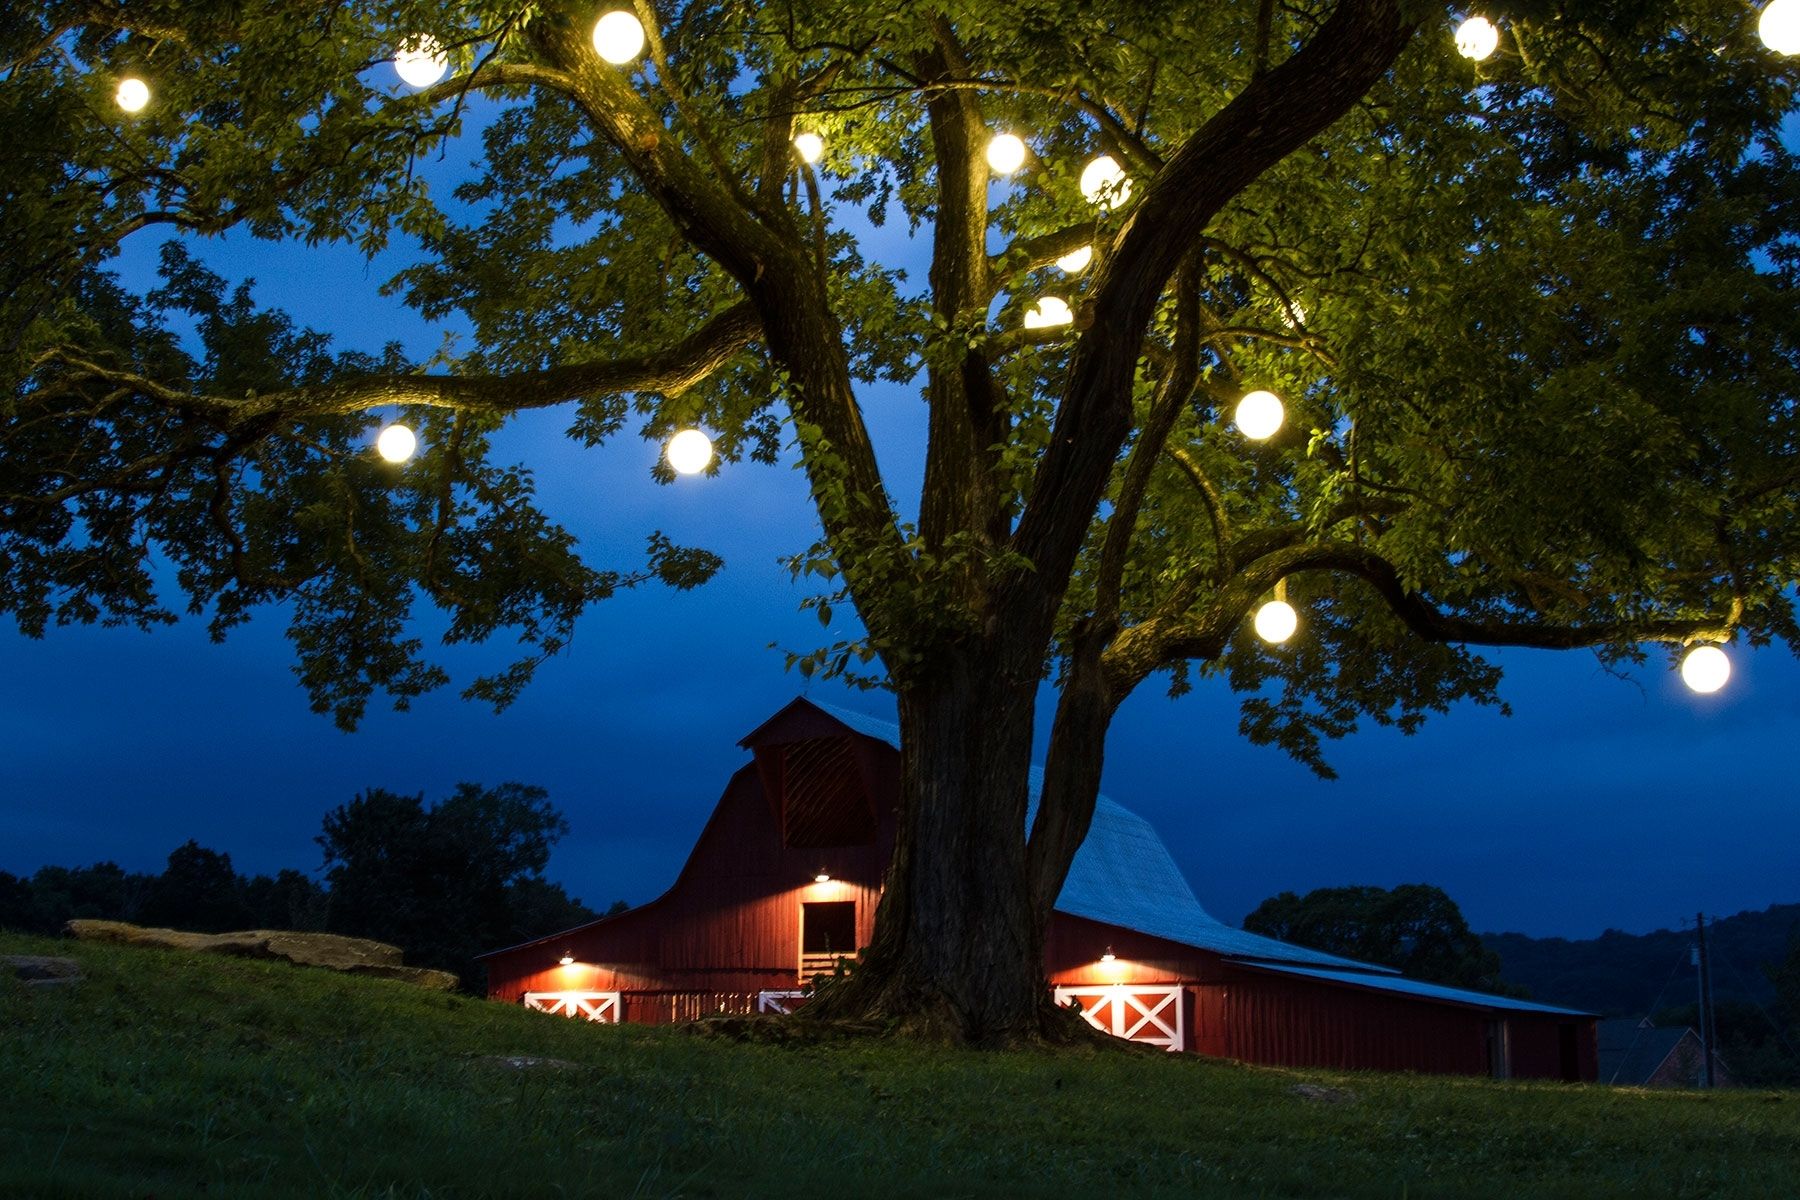 Diy : Appealing Large Outdoor Light Fixtures Hanging Low Voltage Throughout Hanging Outdoor Lights On Trees (View 2 of 15)